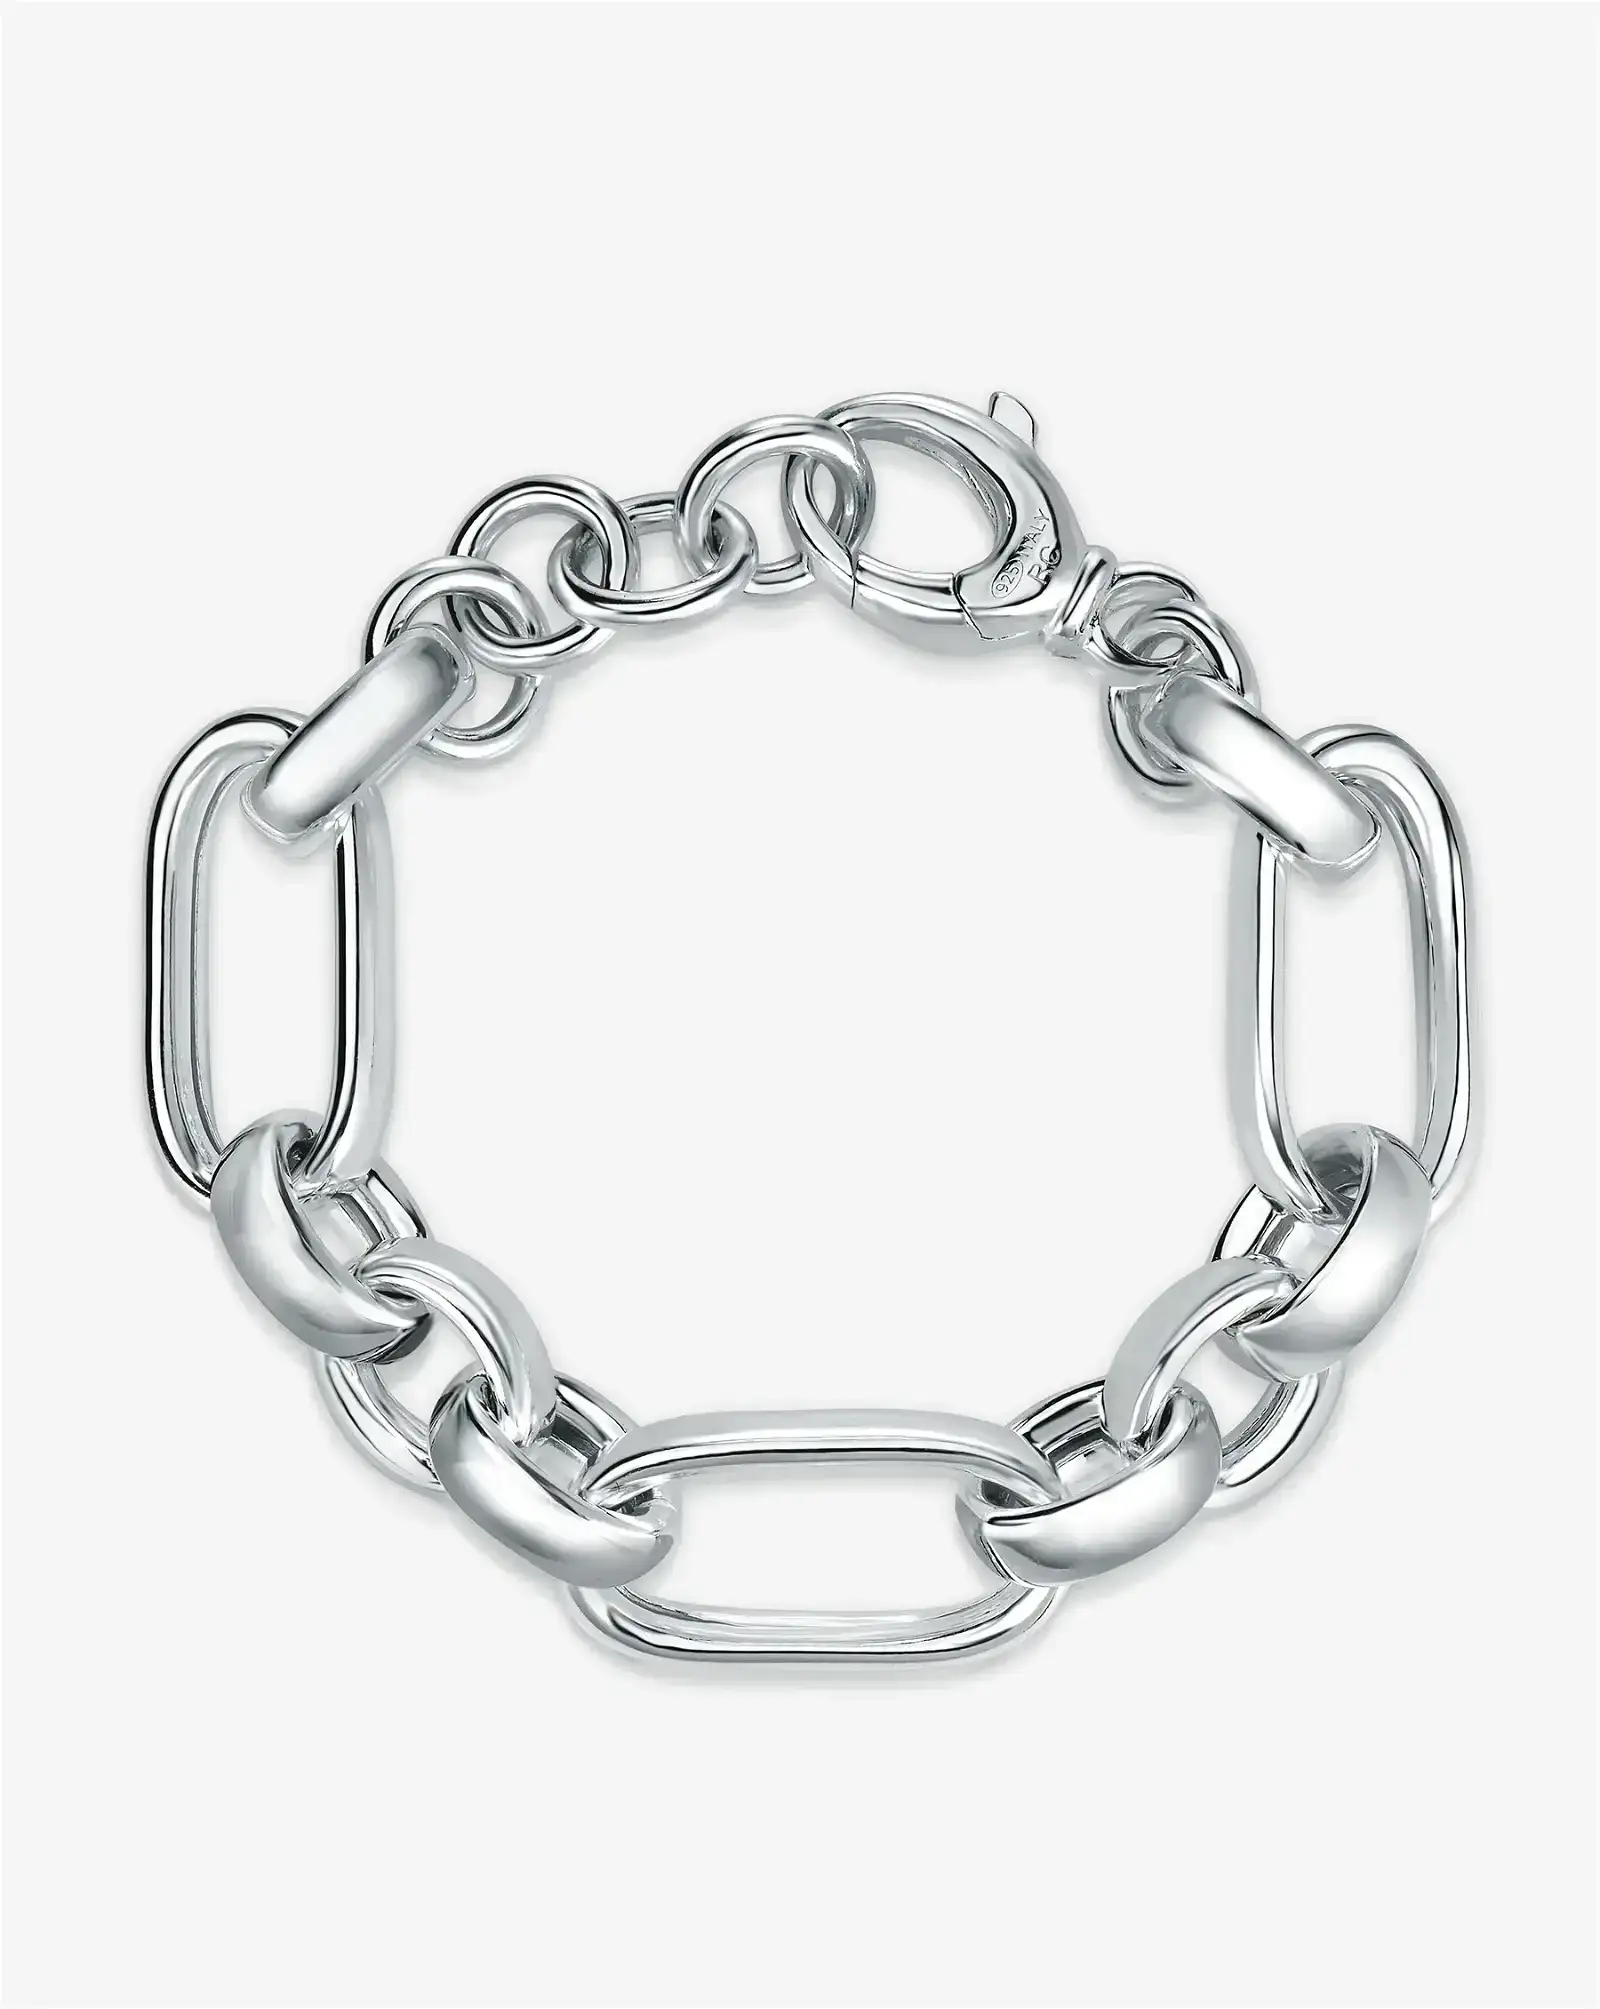 Image of Statement Sterling - Mixed Link Chain Bracelet